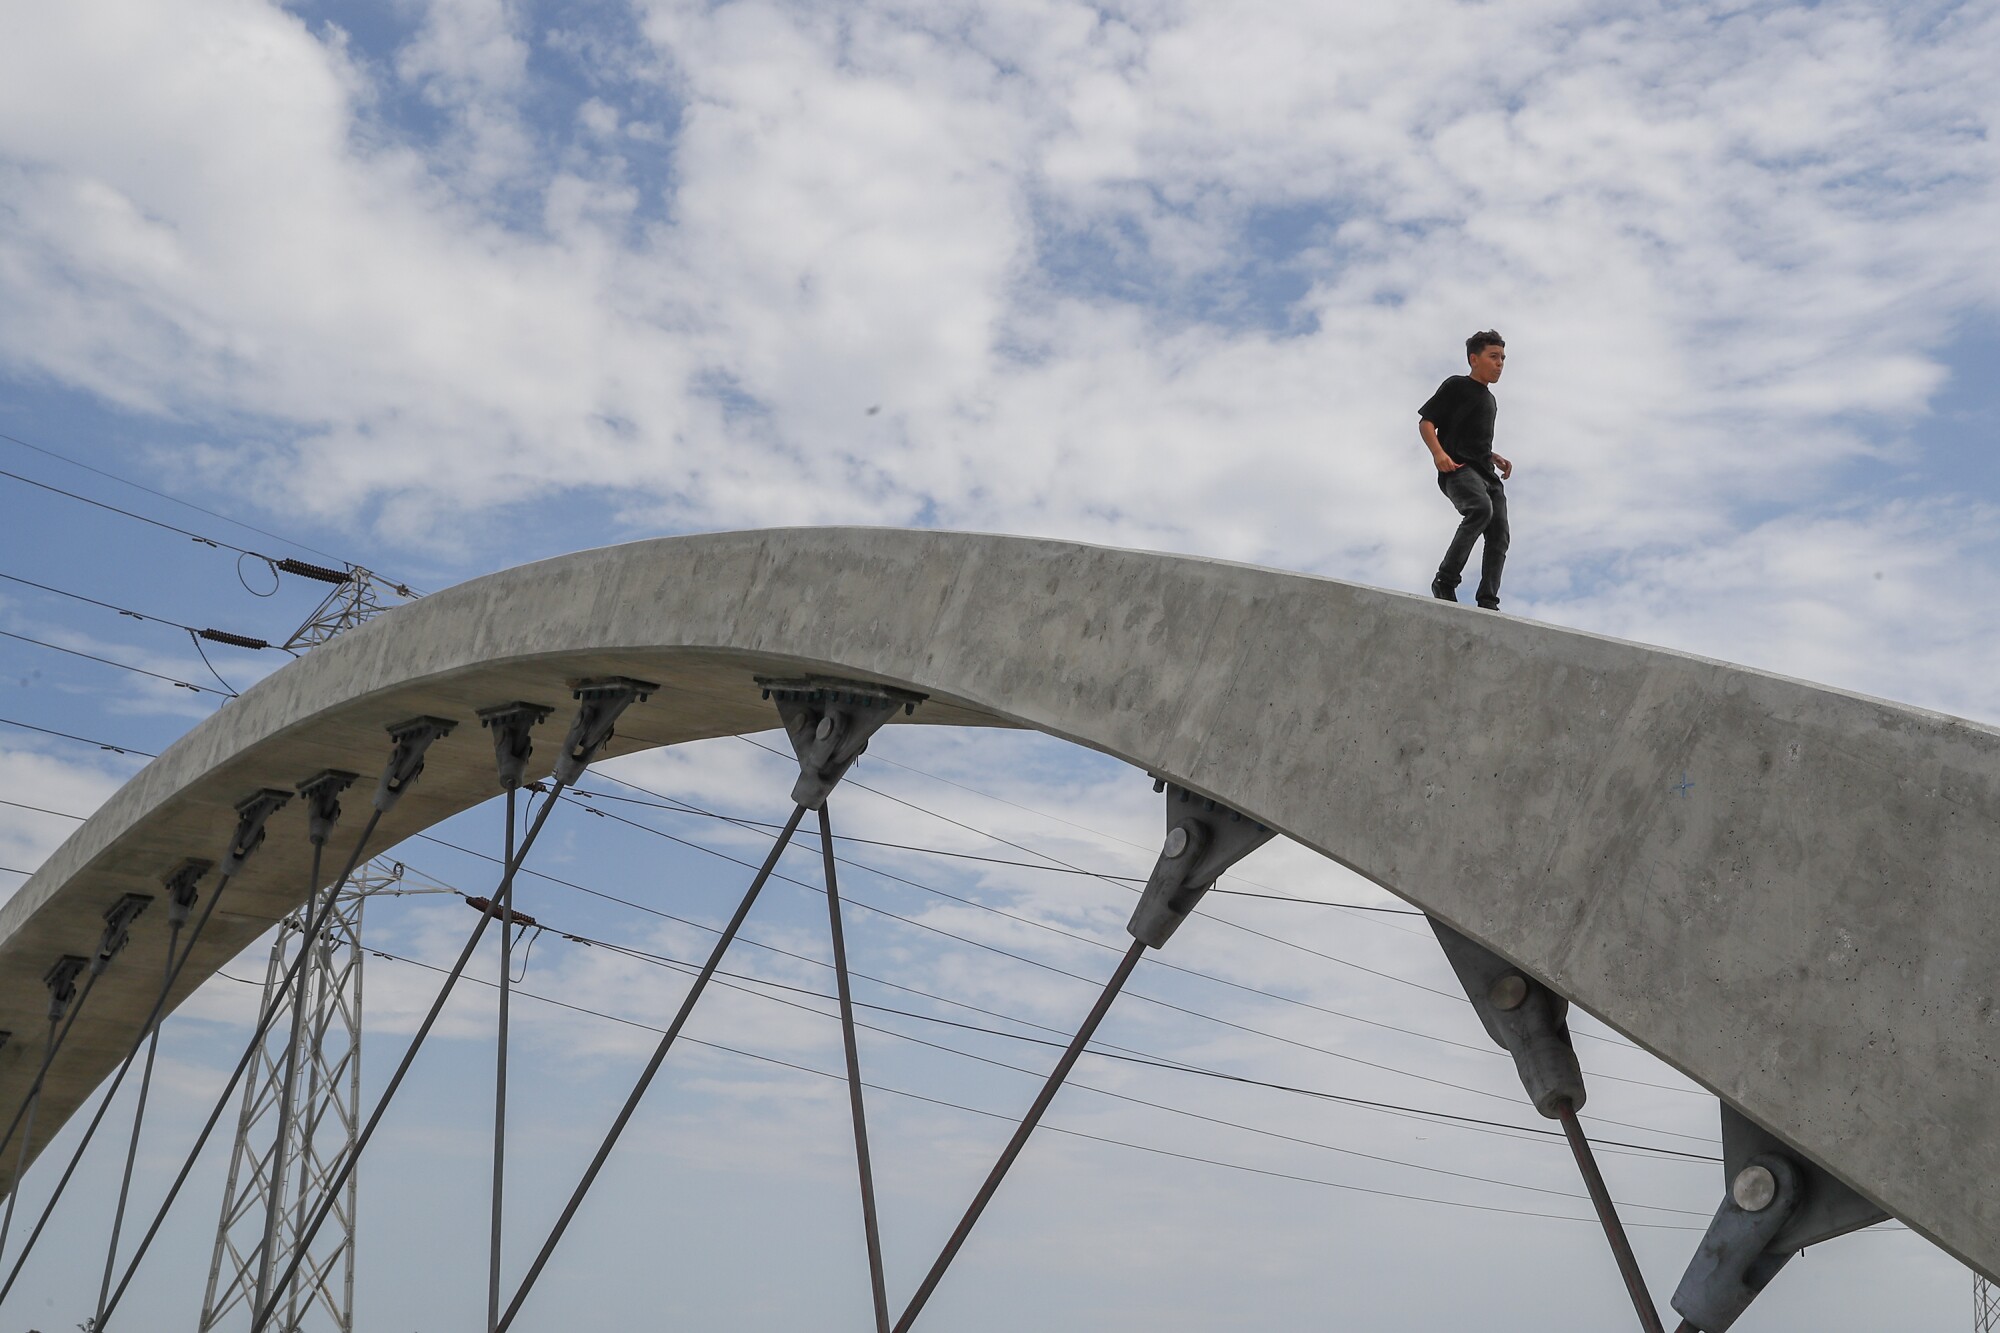 latest news 6th Street Bridge: A civic marvel that reflects LA’s promise and its latent problems